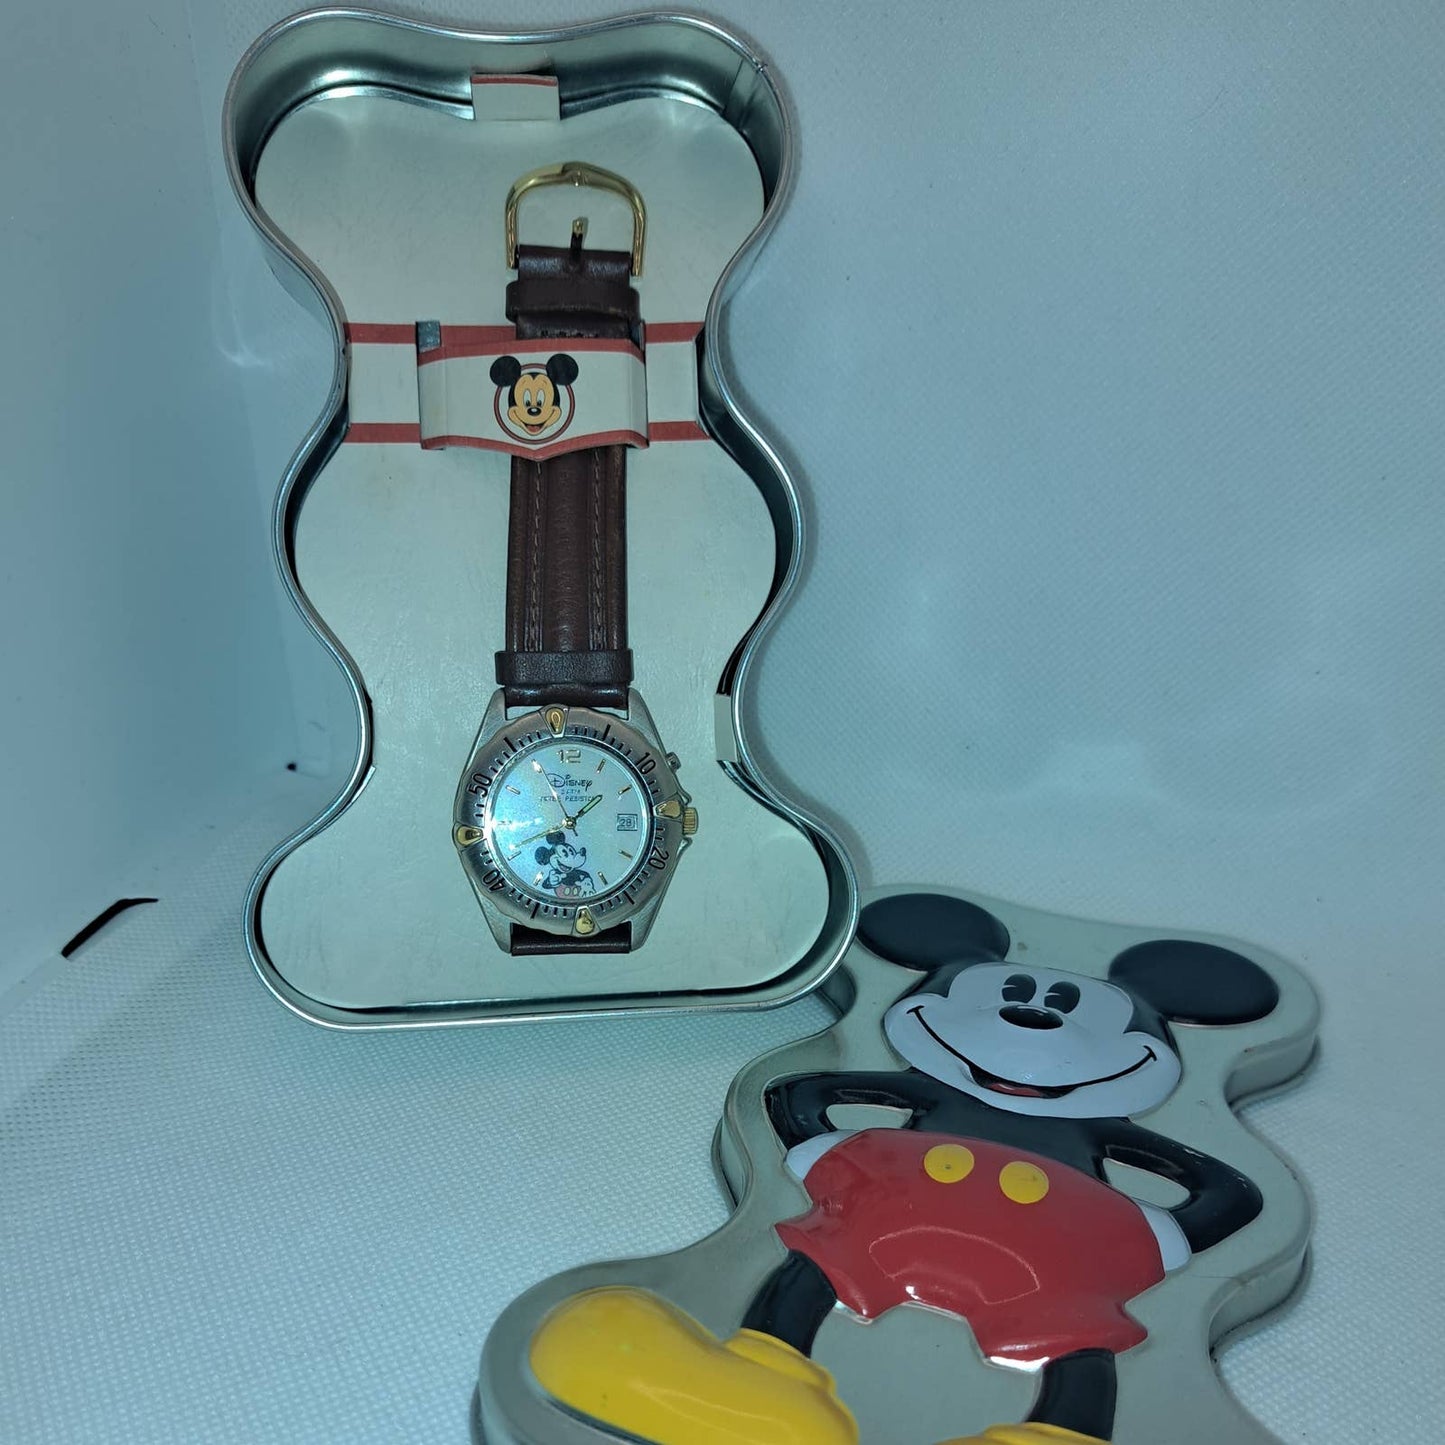 NIB-Beautiful Gold & Stainless- Leather Band Mickey Mouse Wristwatch in TIN